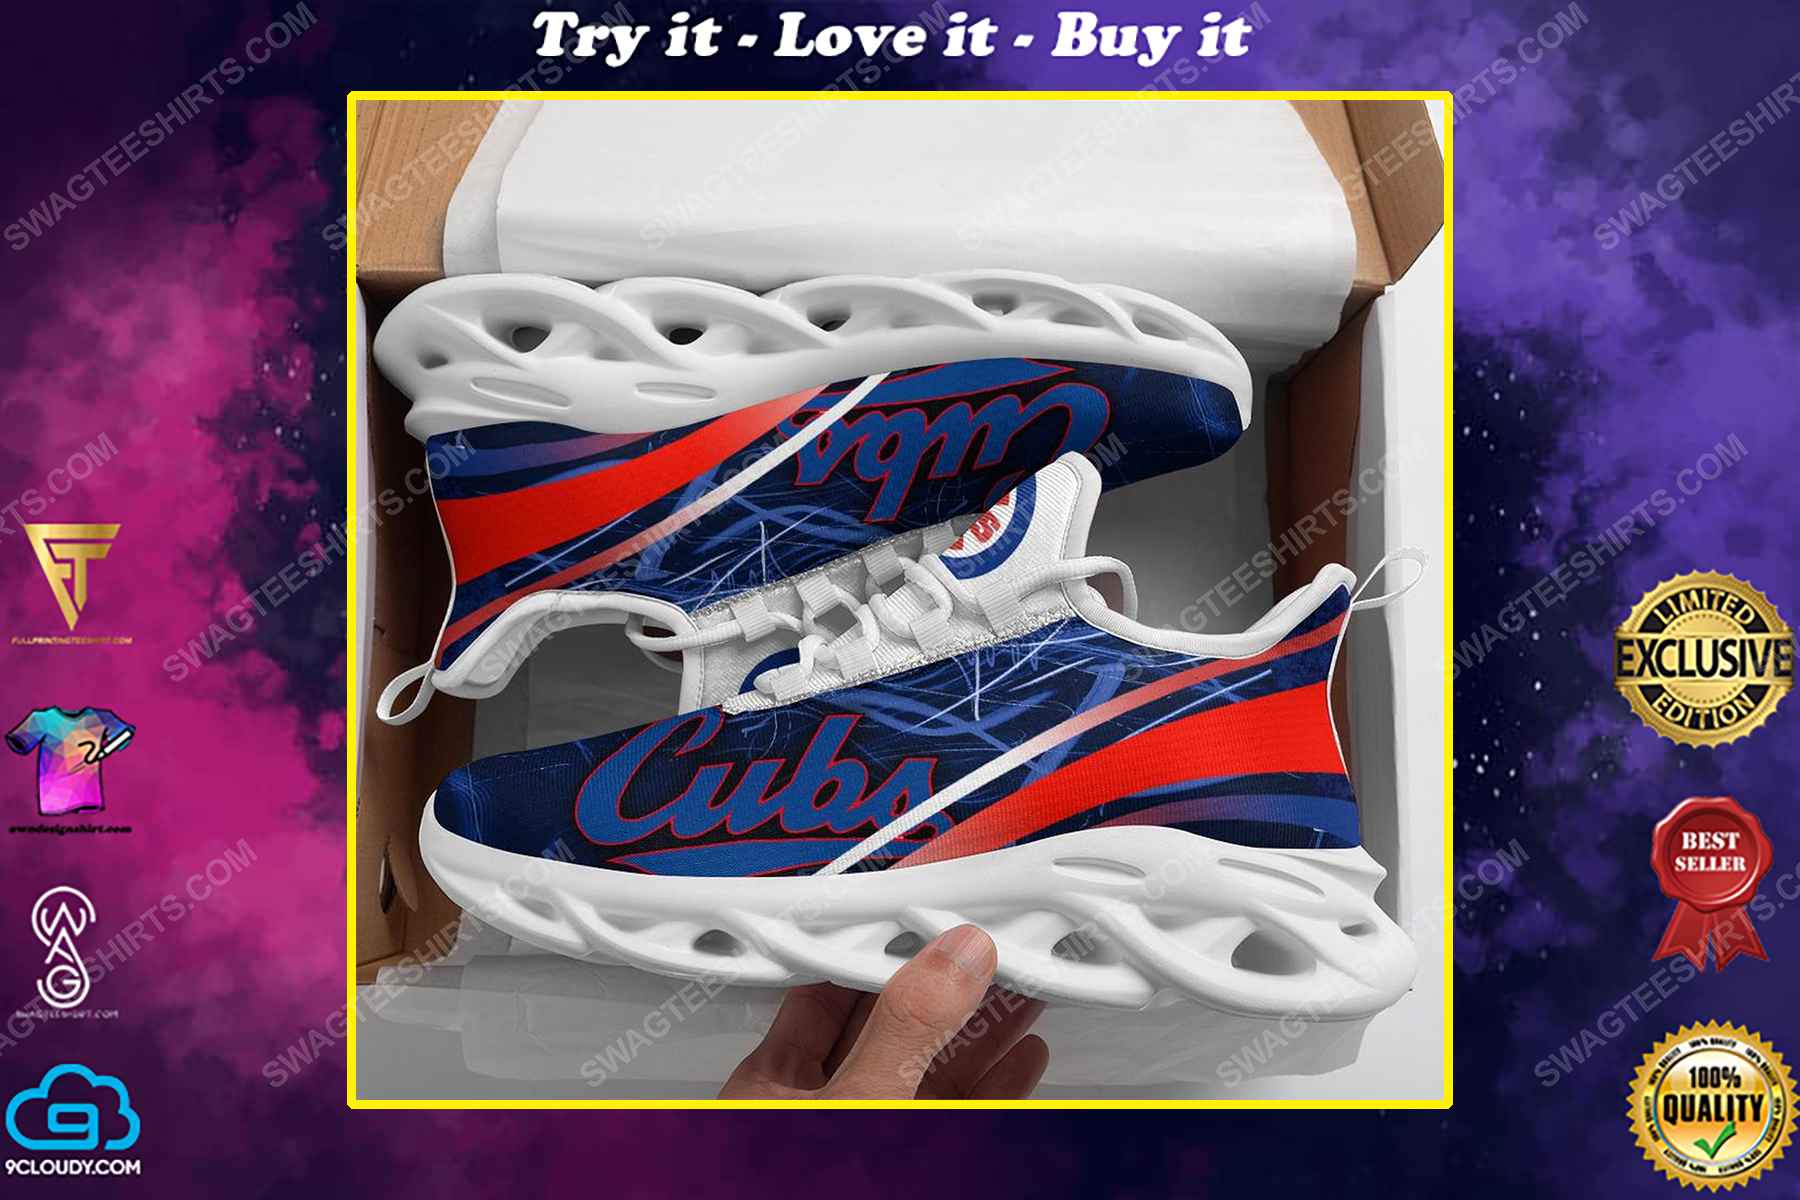 The chicago cubs baseball team max soul shoes